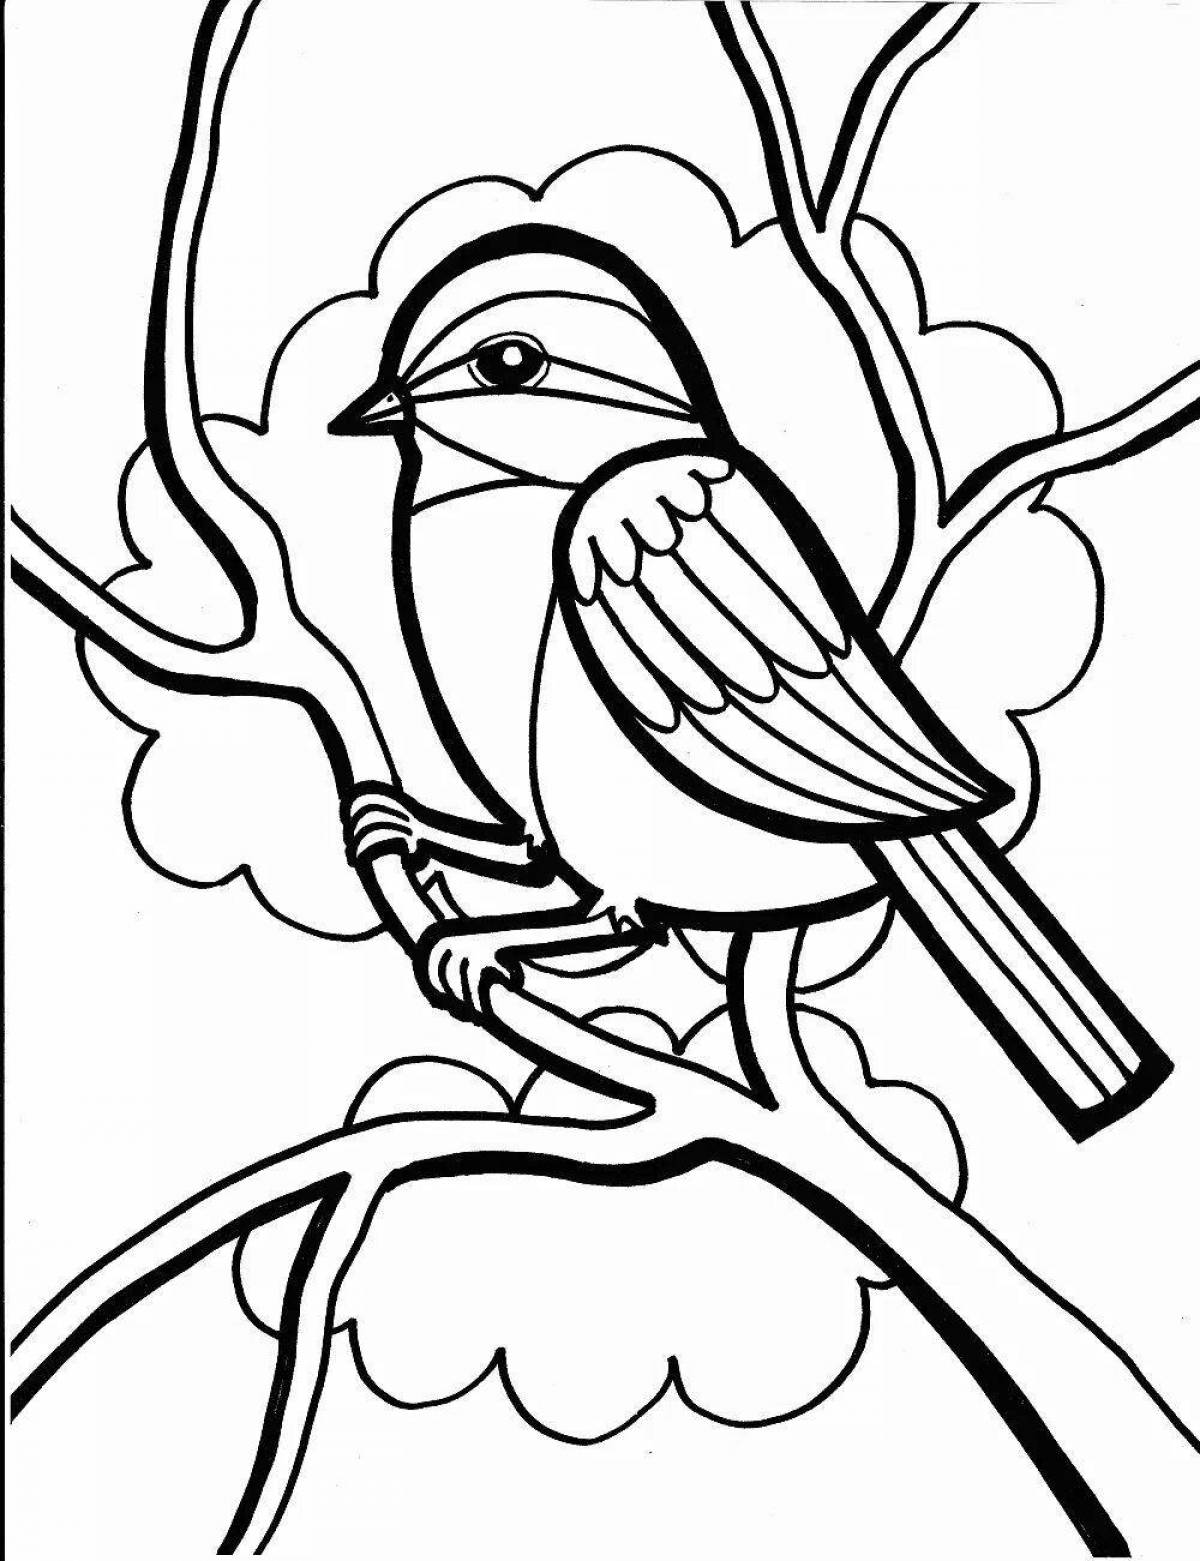 Coloring day of the living titmouse